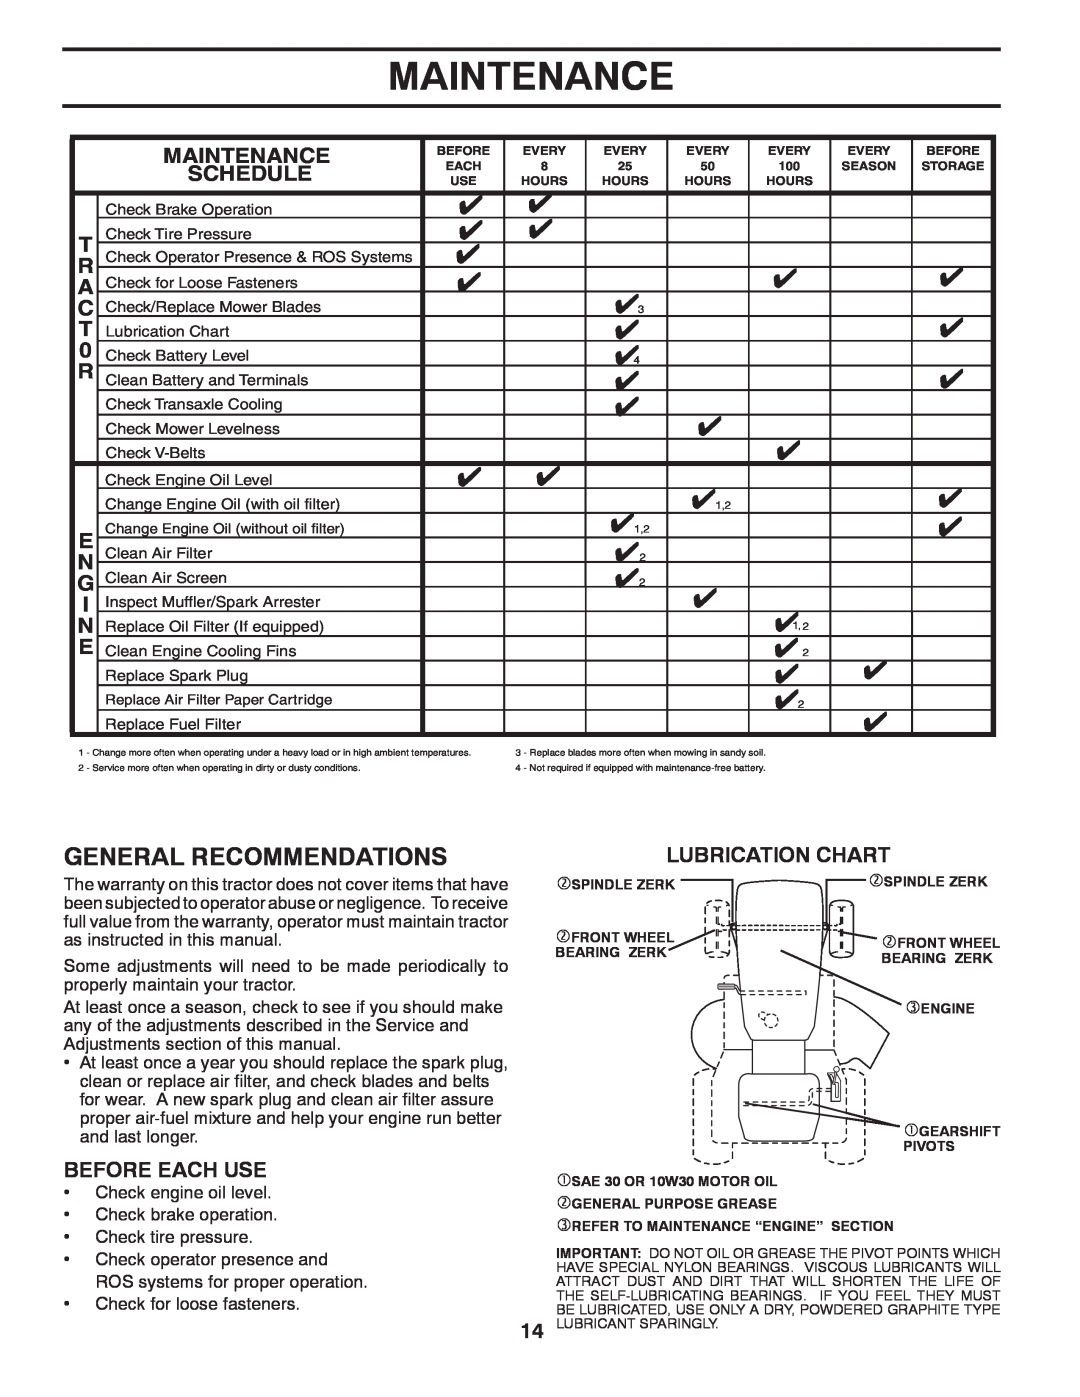 Poulan 96012011200, 438511, PO14542LT Maintenance, General Recommendations, Schedule, Before Each Use, Lubrication Chart 